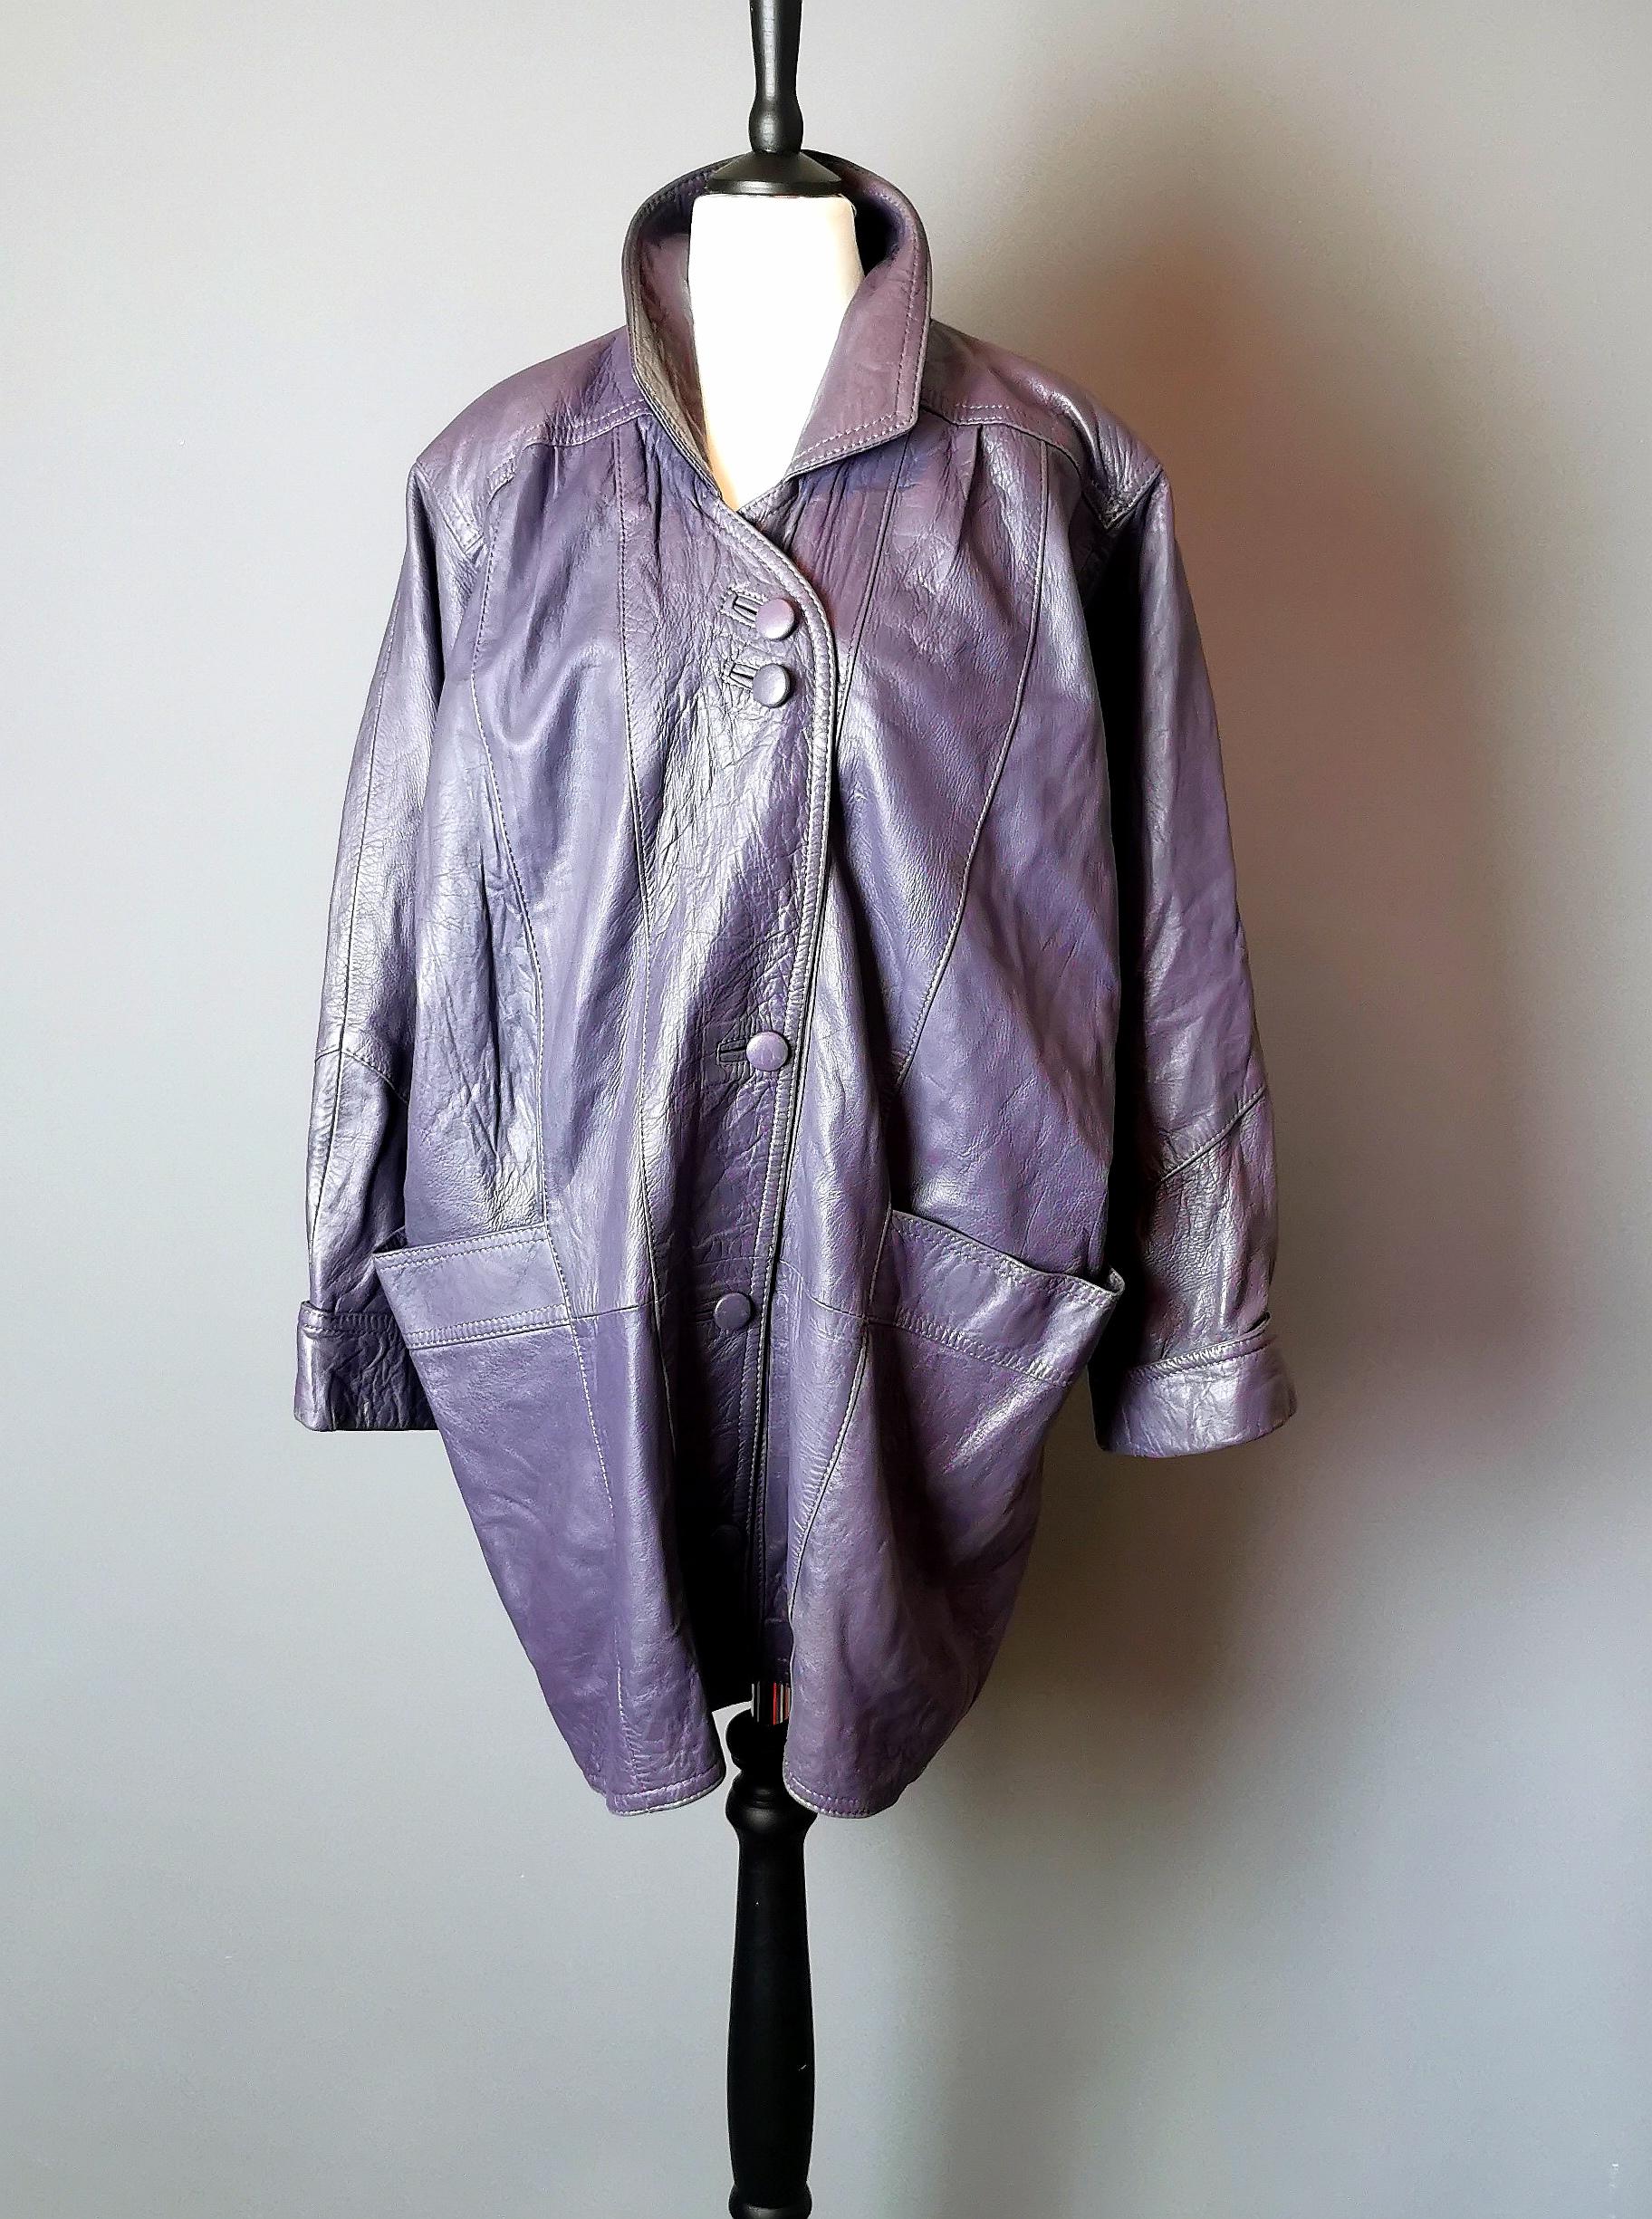 A superb original 80s oversized leather jacket.

This real leather jacket has everything 80s in it's design, from the chunky frame to the colour pop of the purple.

It fastens with leather covered buttons and is fully lined.

Labelled inside for